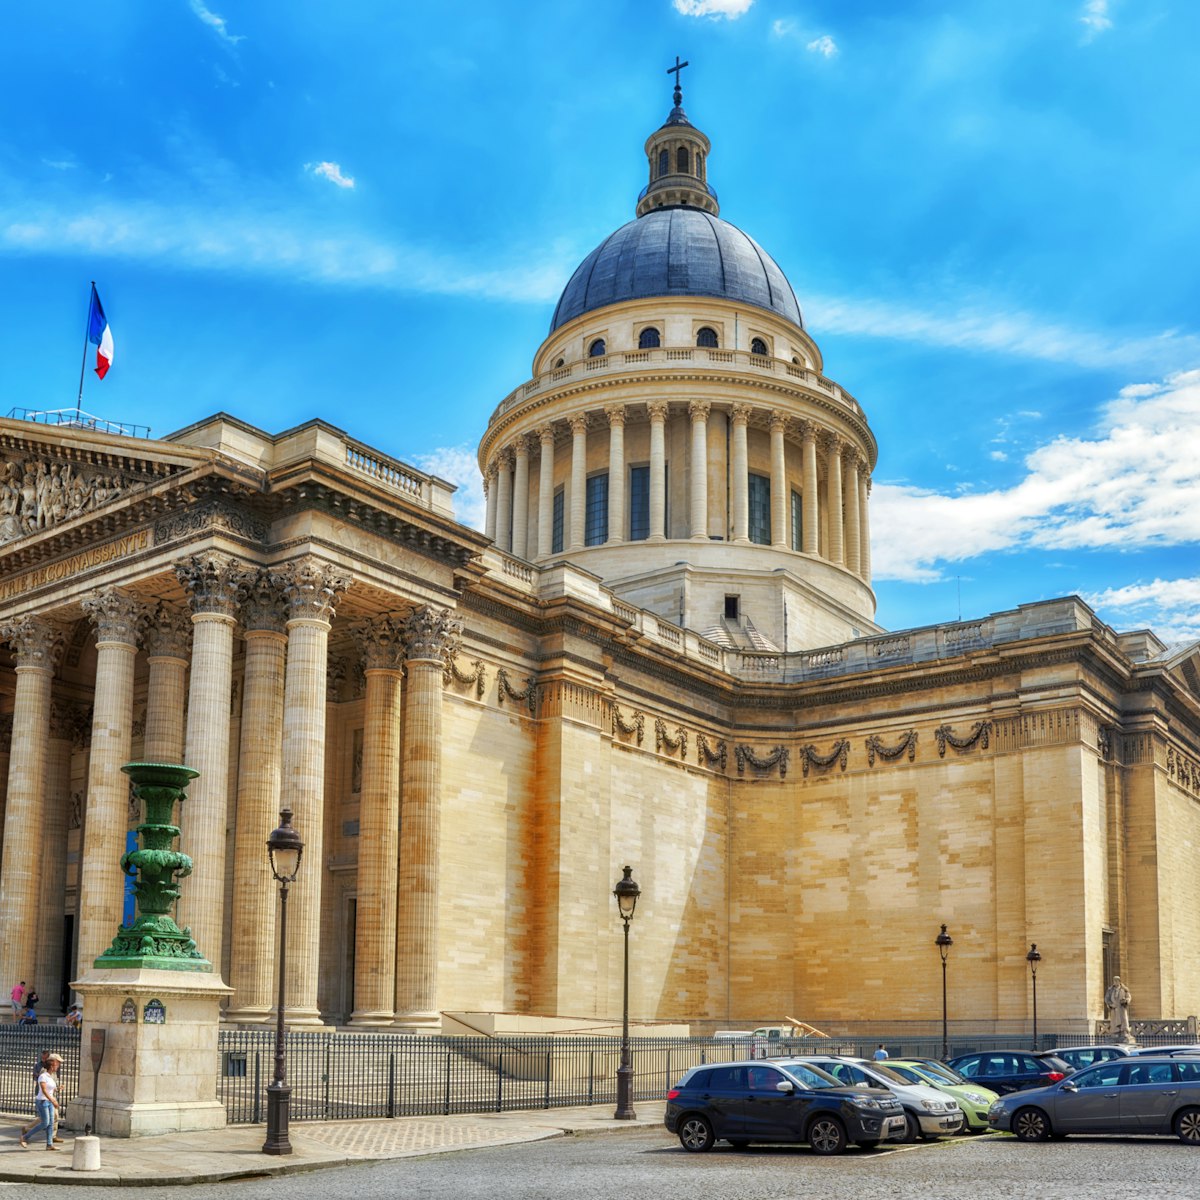 PARIS, FRANCE - JULY 08, 2016 : French Mausoleum of Great People of France - the Pantheon in Paris. France.; Shutterstock ID 573291478; Your name (First / Last): Daniel Fahey; GL account no.: 65050; Netsuite department name: Online Editorial; Full Product or Project name including edition: Panthéon POI